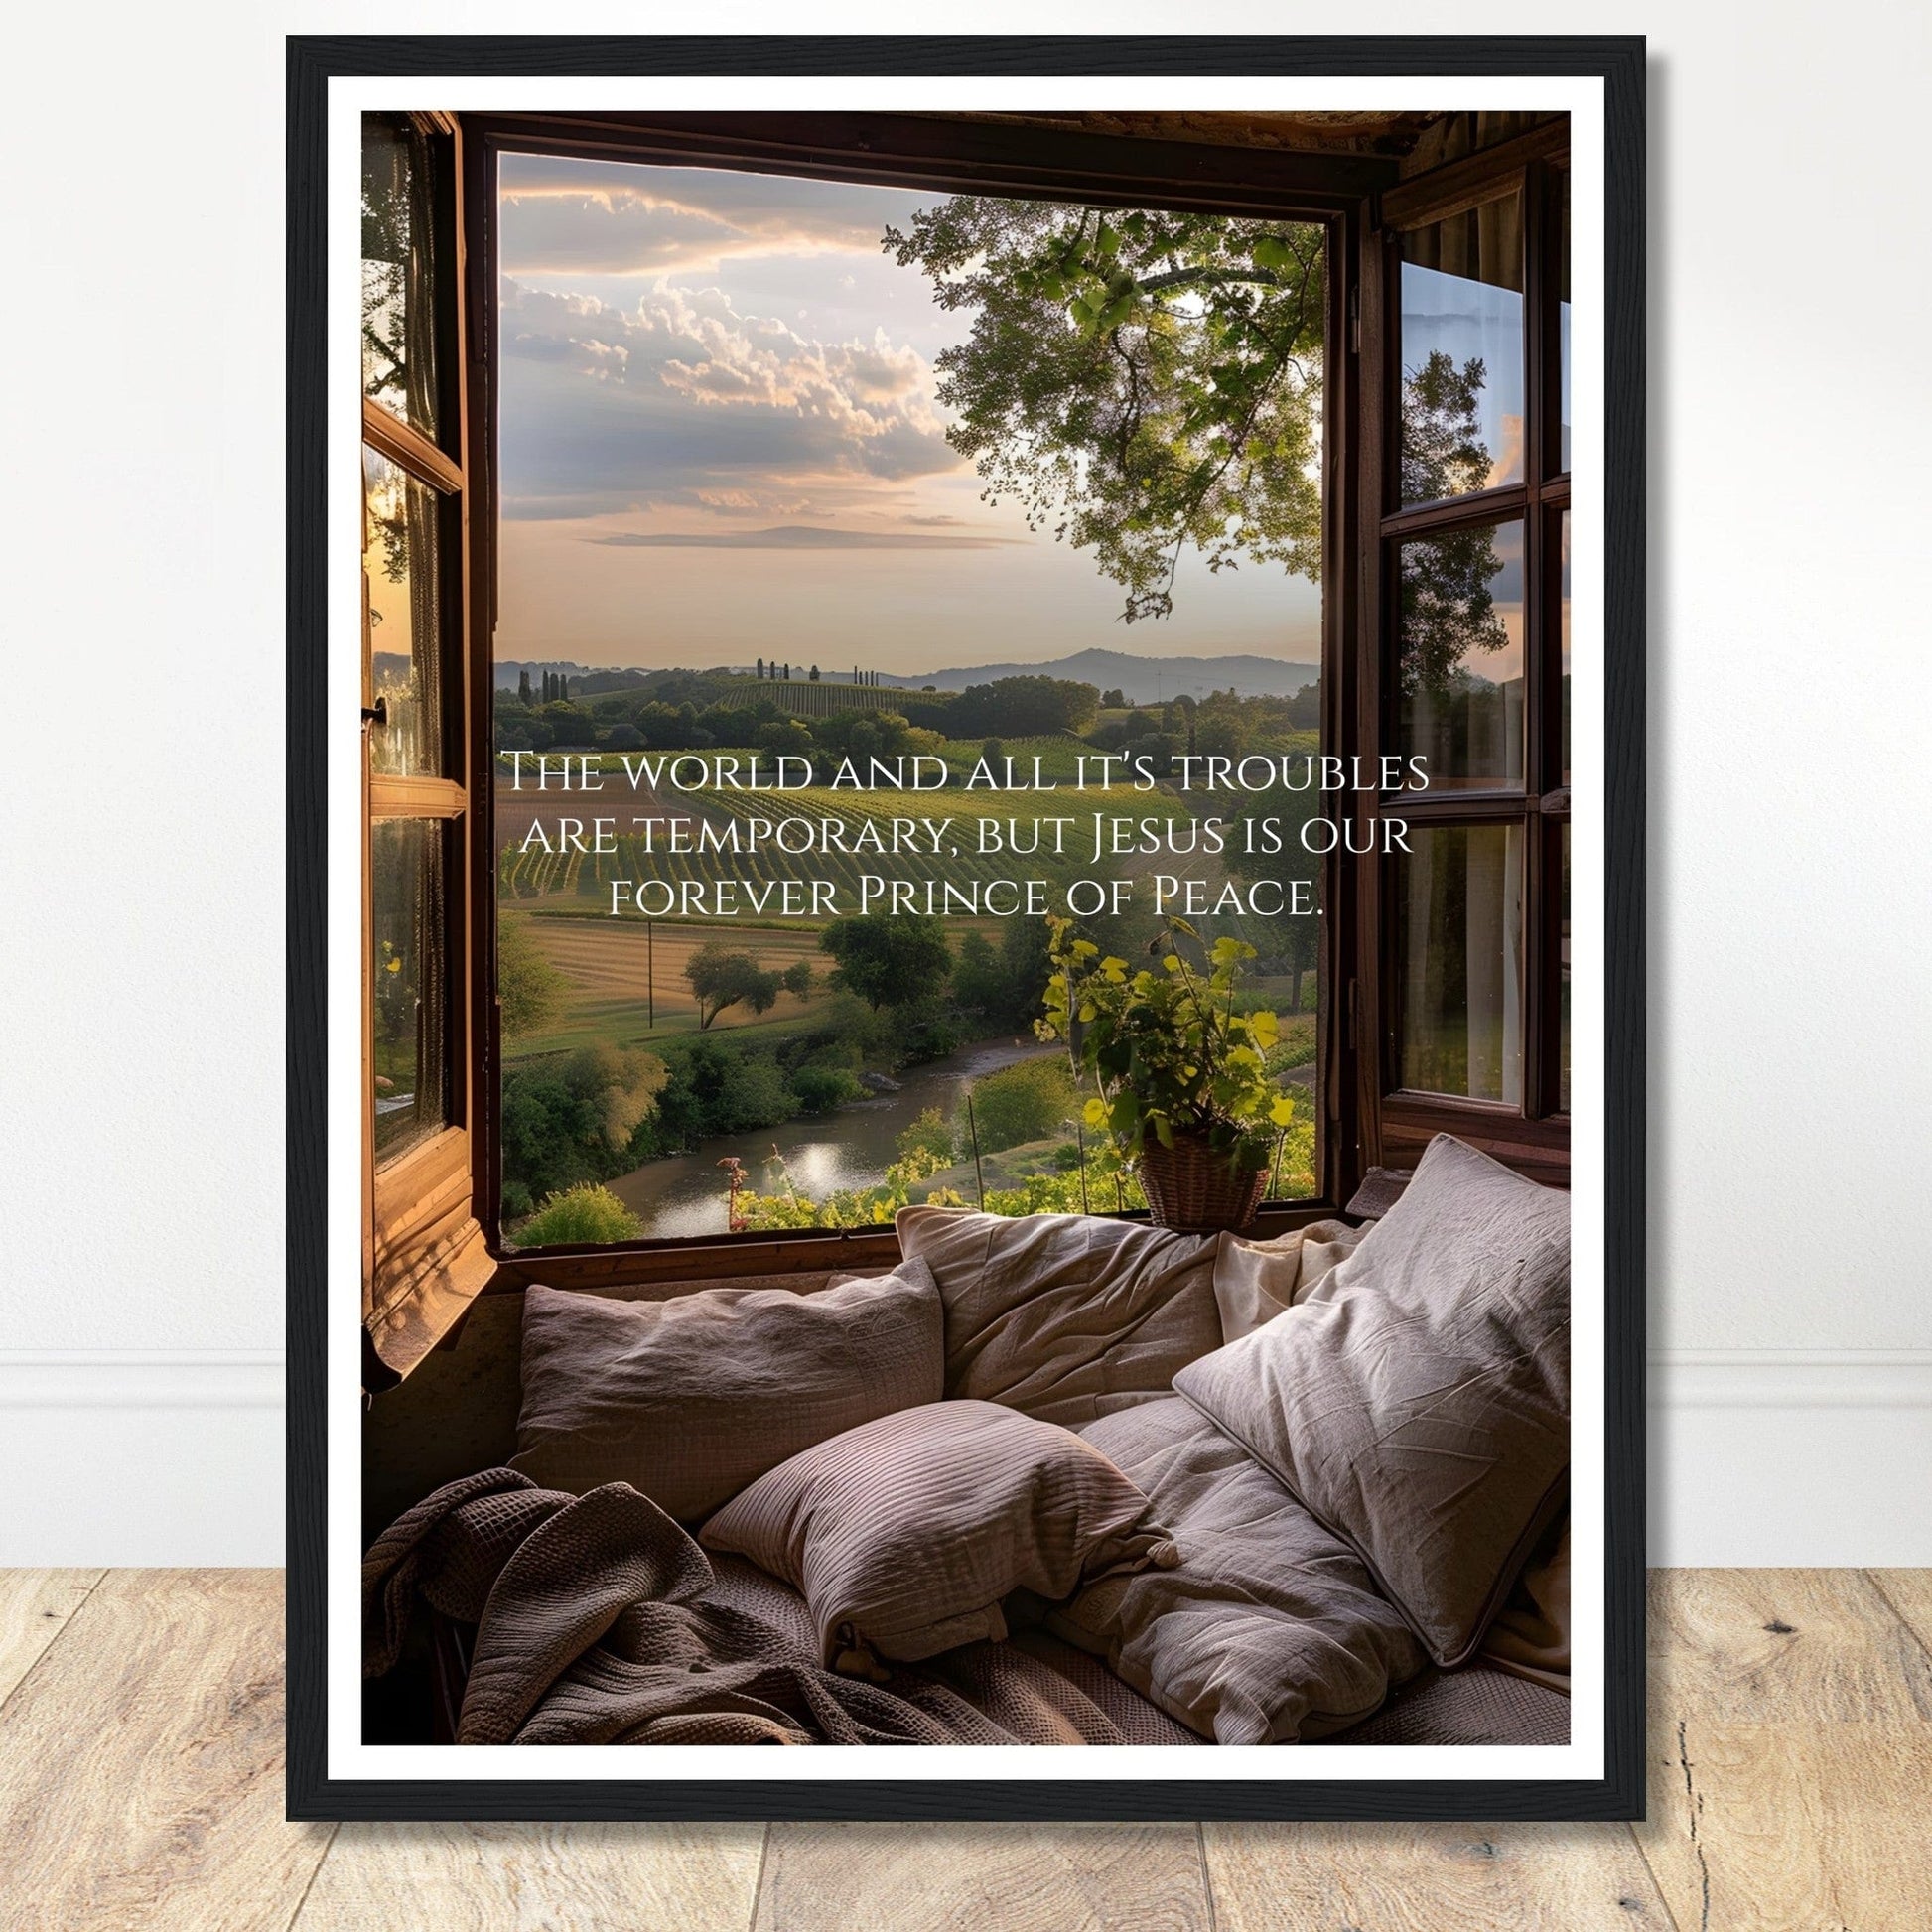 Coffee With My Father Print Material 45x60 cm / 18x24″ / Premium Matte Paper Wooden Framed Poster / Black frame Jesus, Our Forever Prince of Peace